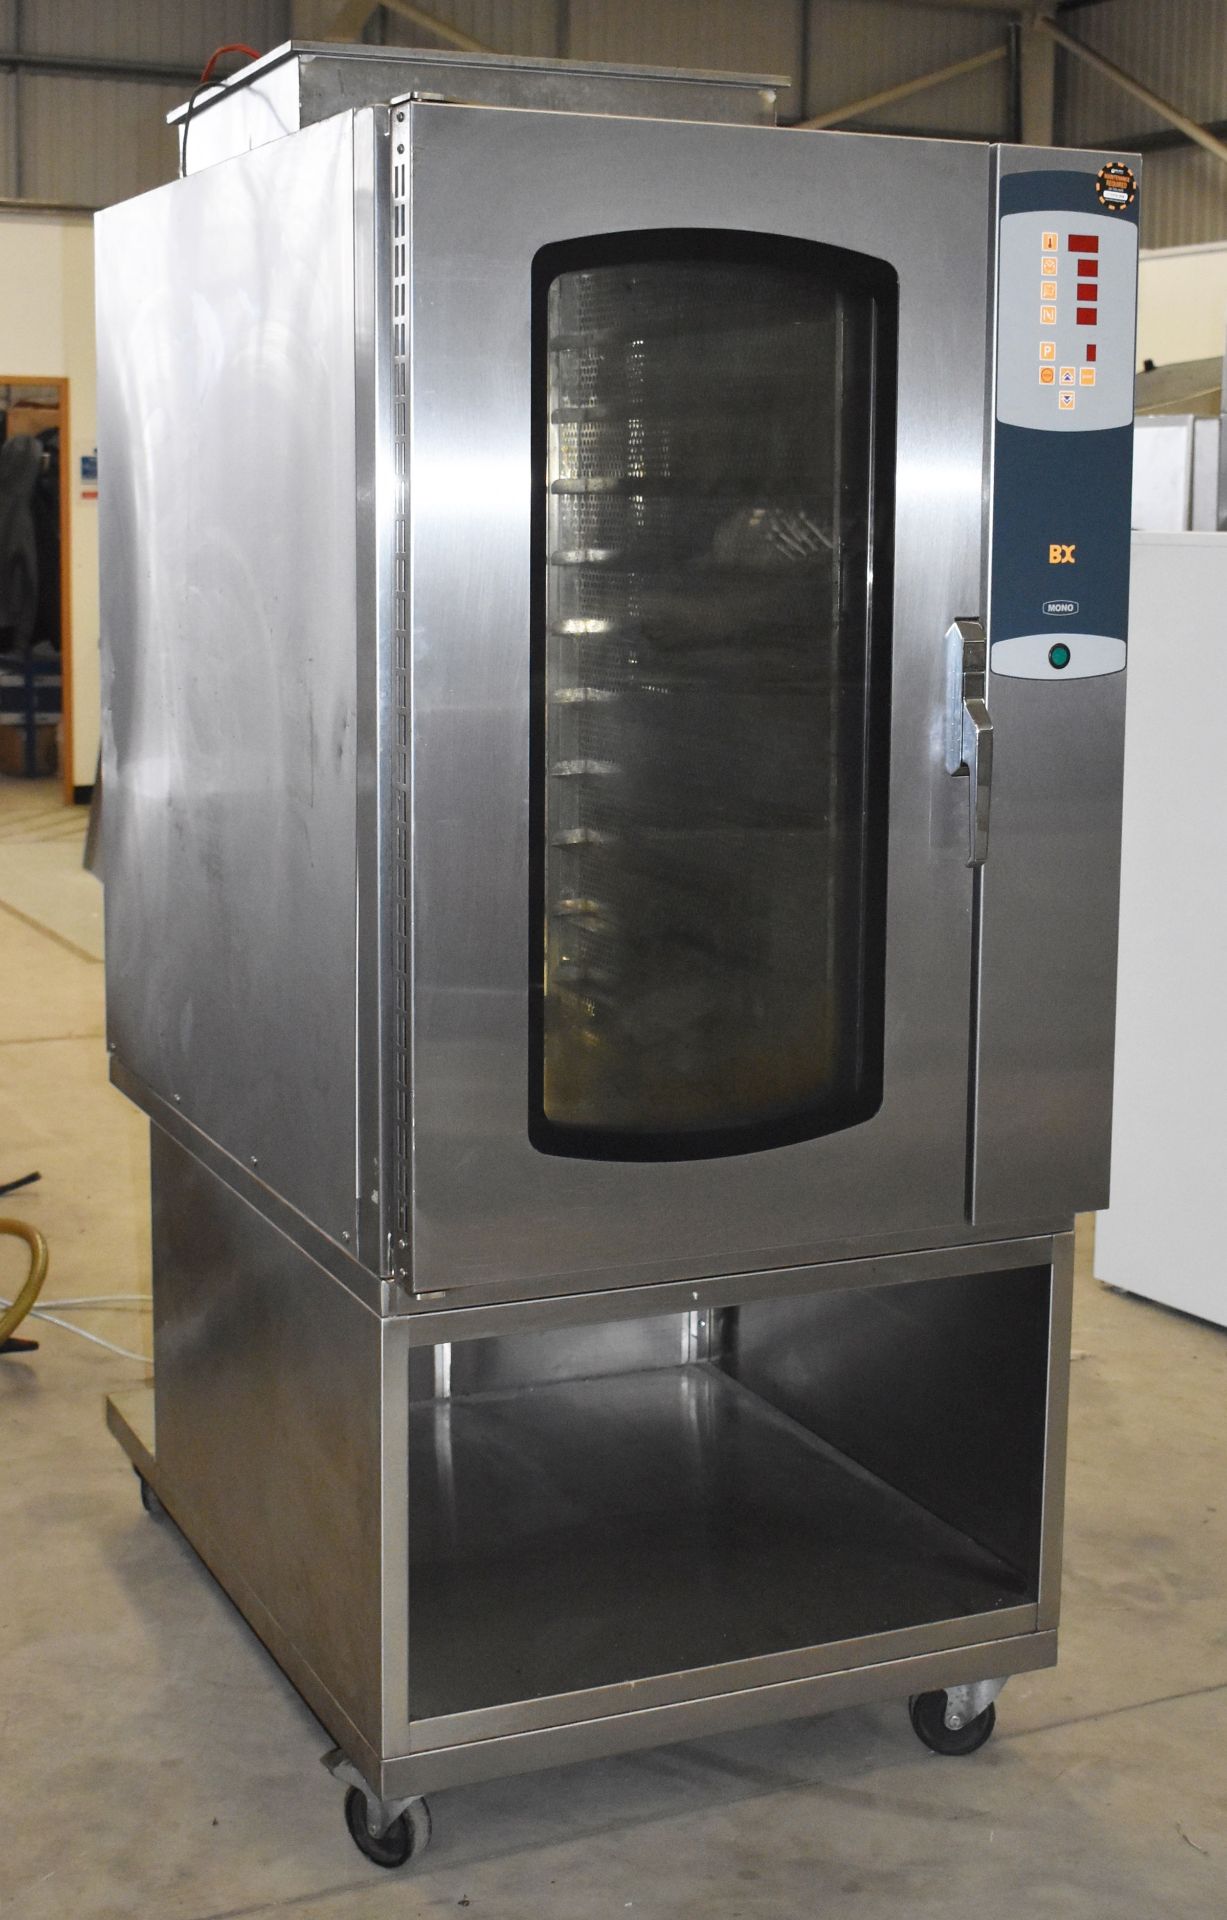 1 x Mono 10 Grid Classic Steam BX Convection Oven - Model FG150C - 3 Phase Power - H204 x W84 x D127 - Image 3 of 12